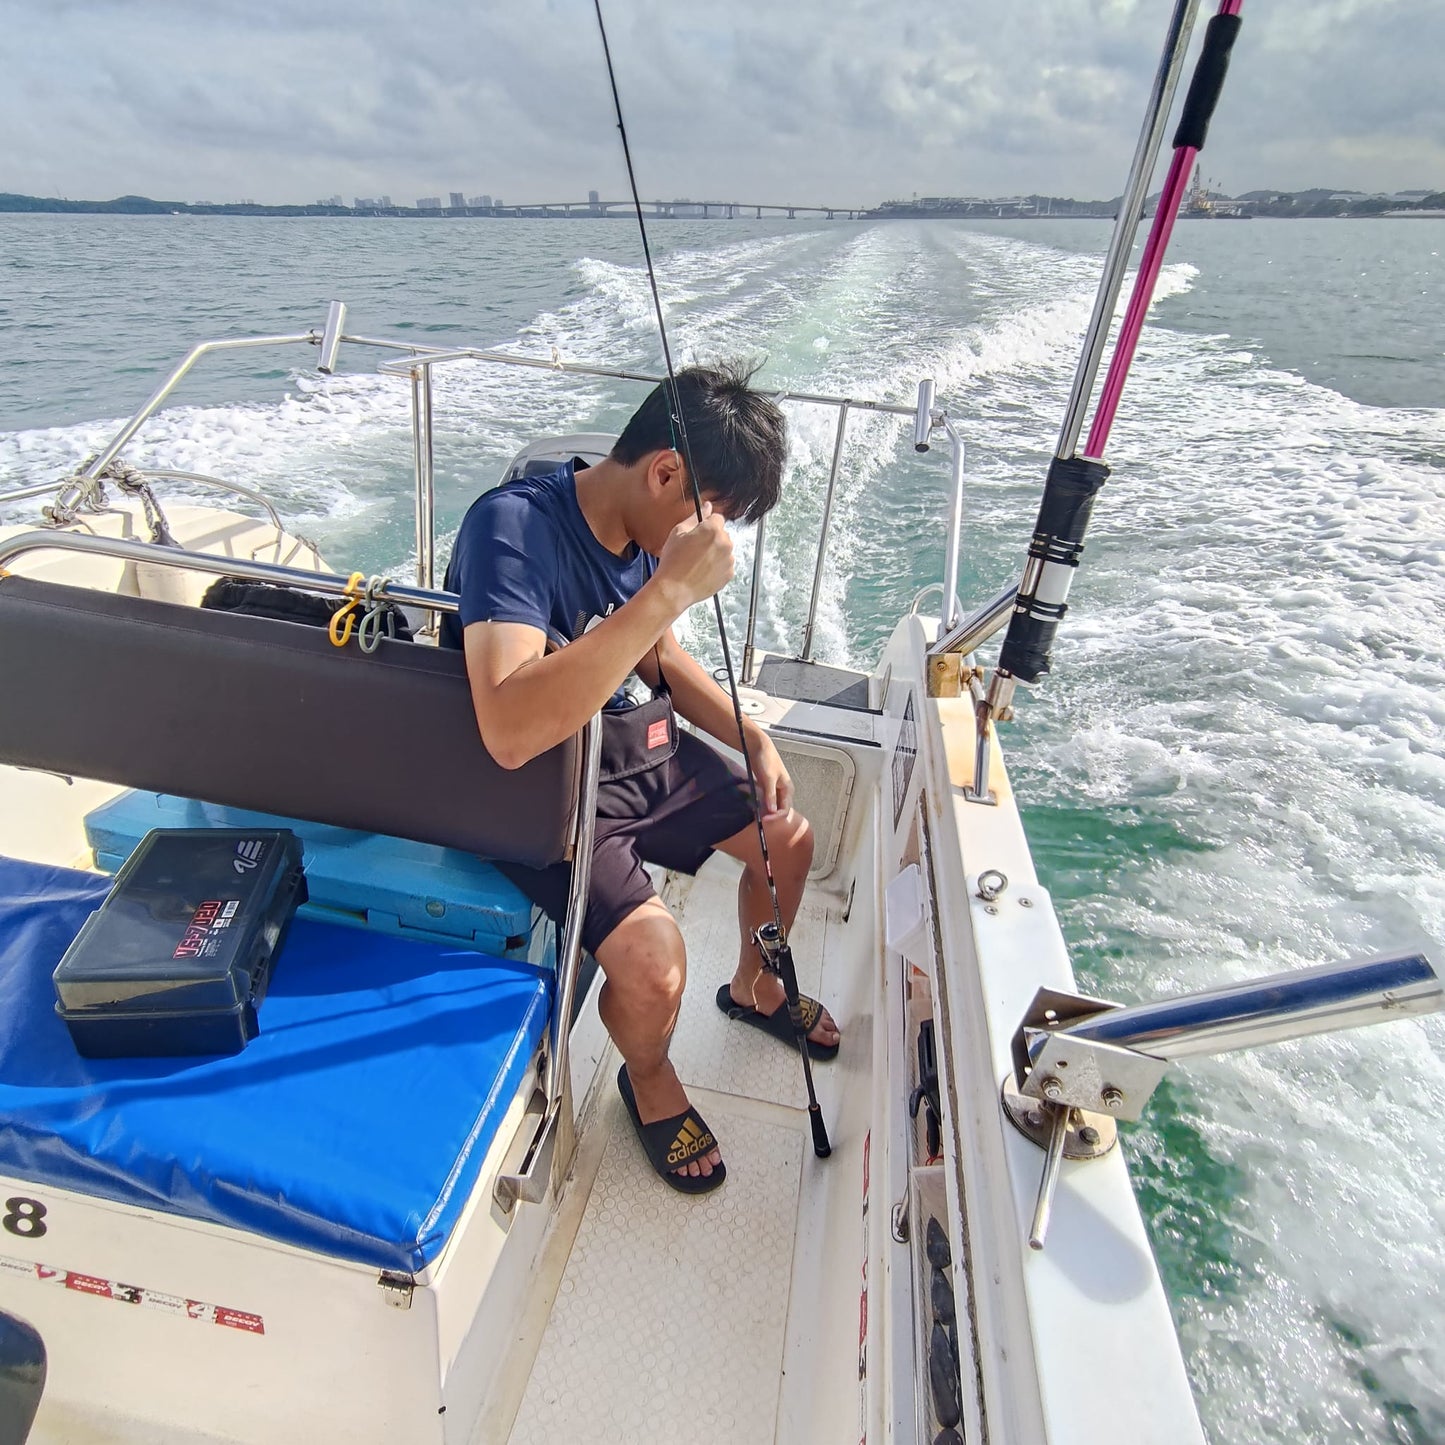 Private Boat Fishing Lesson at Tuas (Big Boat - Open Dated Ticket) - Purehybridz Kayak Fishing